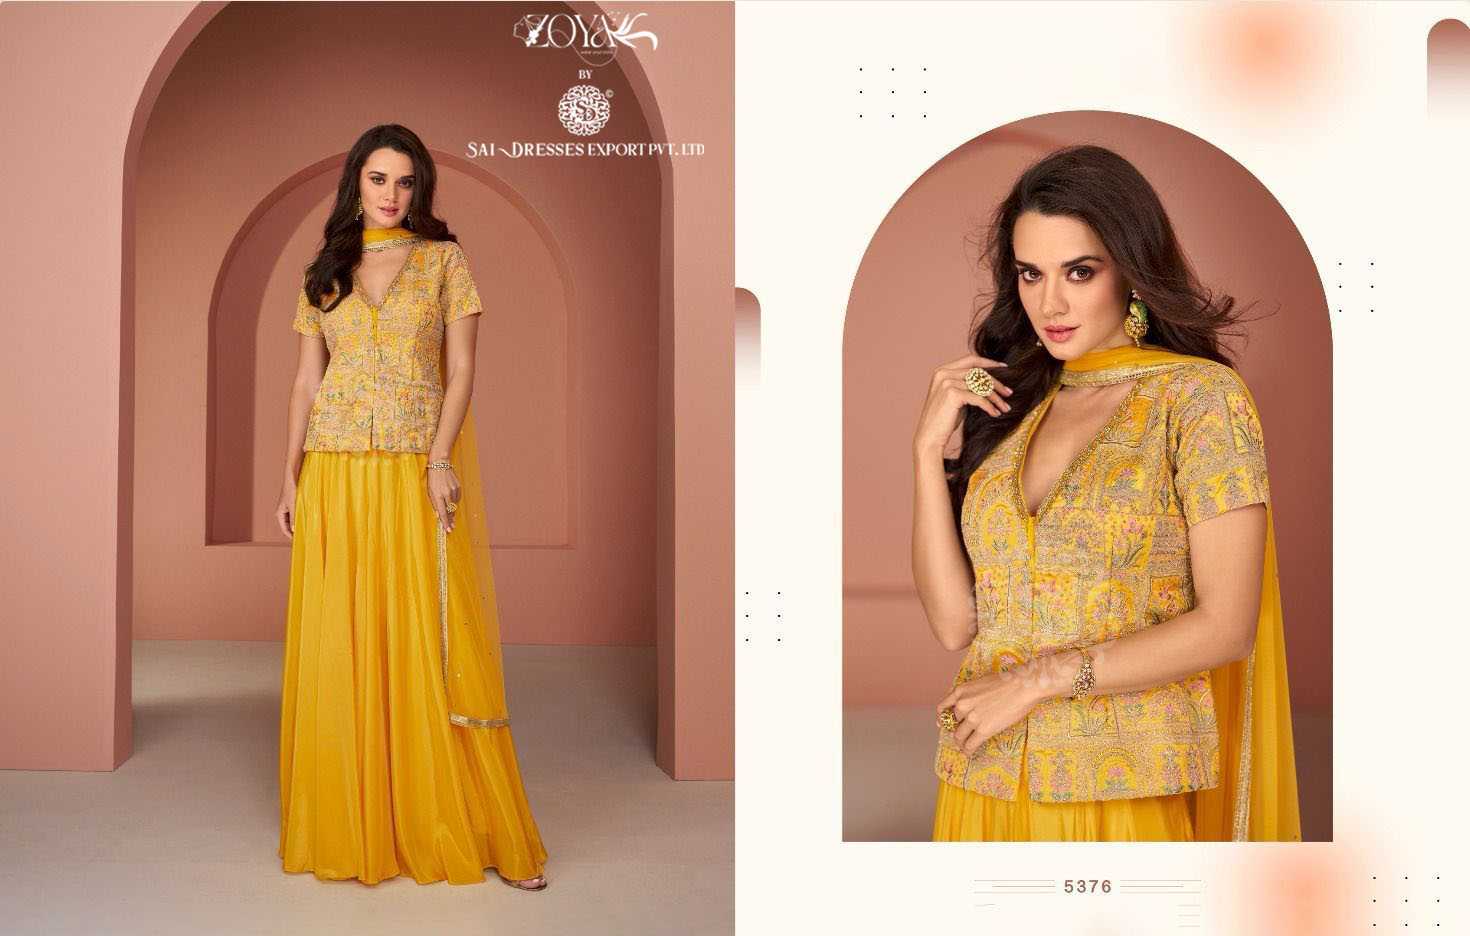 SAI DRESSES PRESENT JASMINE READYMADE EXCLUSIVE PARTY WEAR HEAVY DESIGNER SUITS IN WHOLESALE RATE IN SURAT 